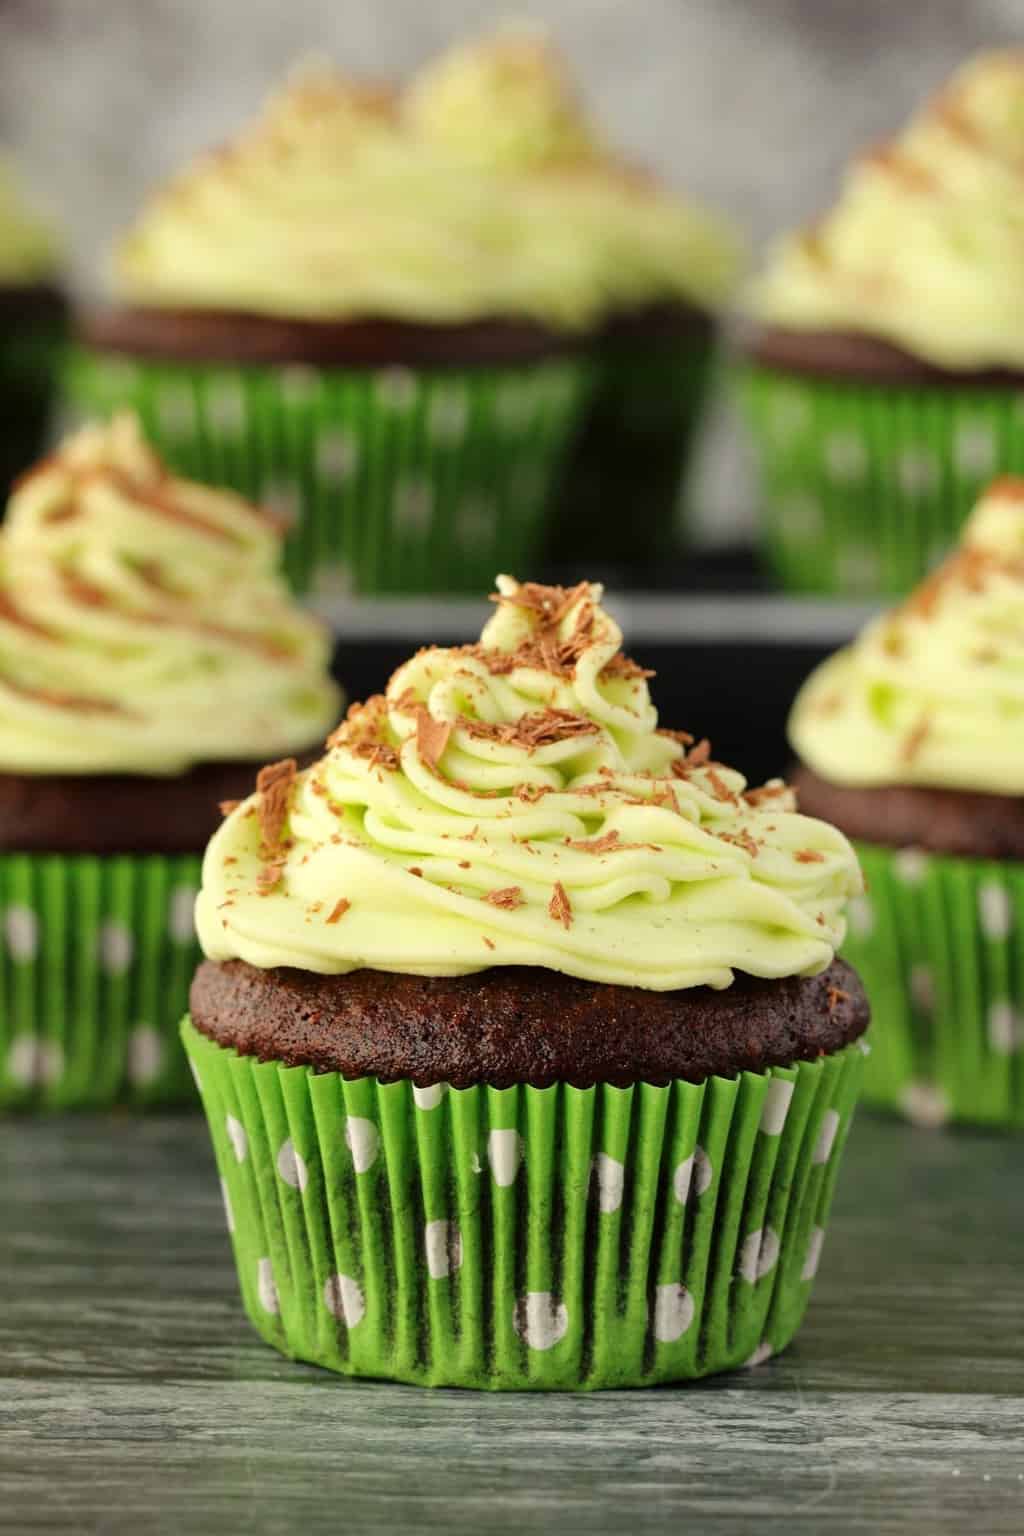 Vegan Chocolate Cupcakes With Mint Buttercream Frosting